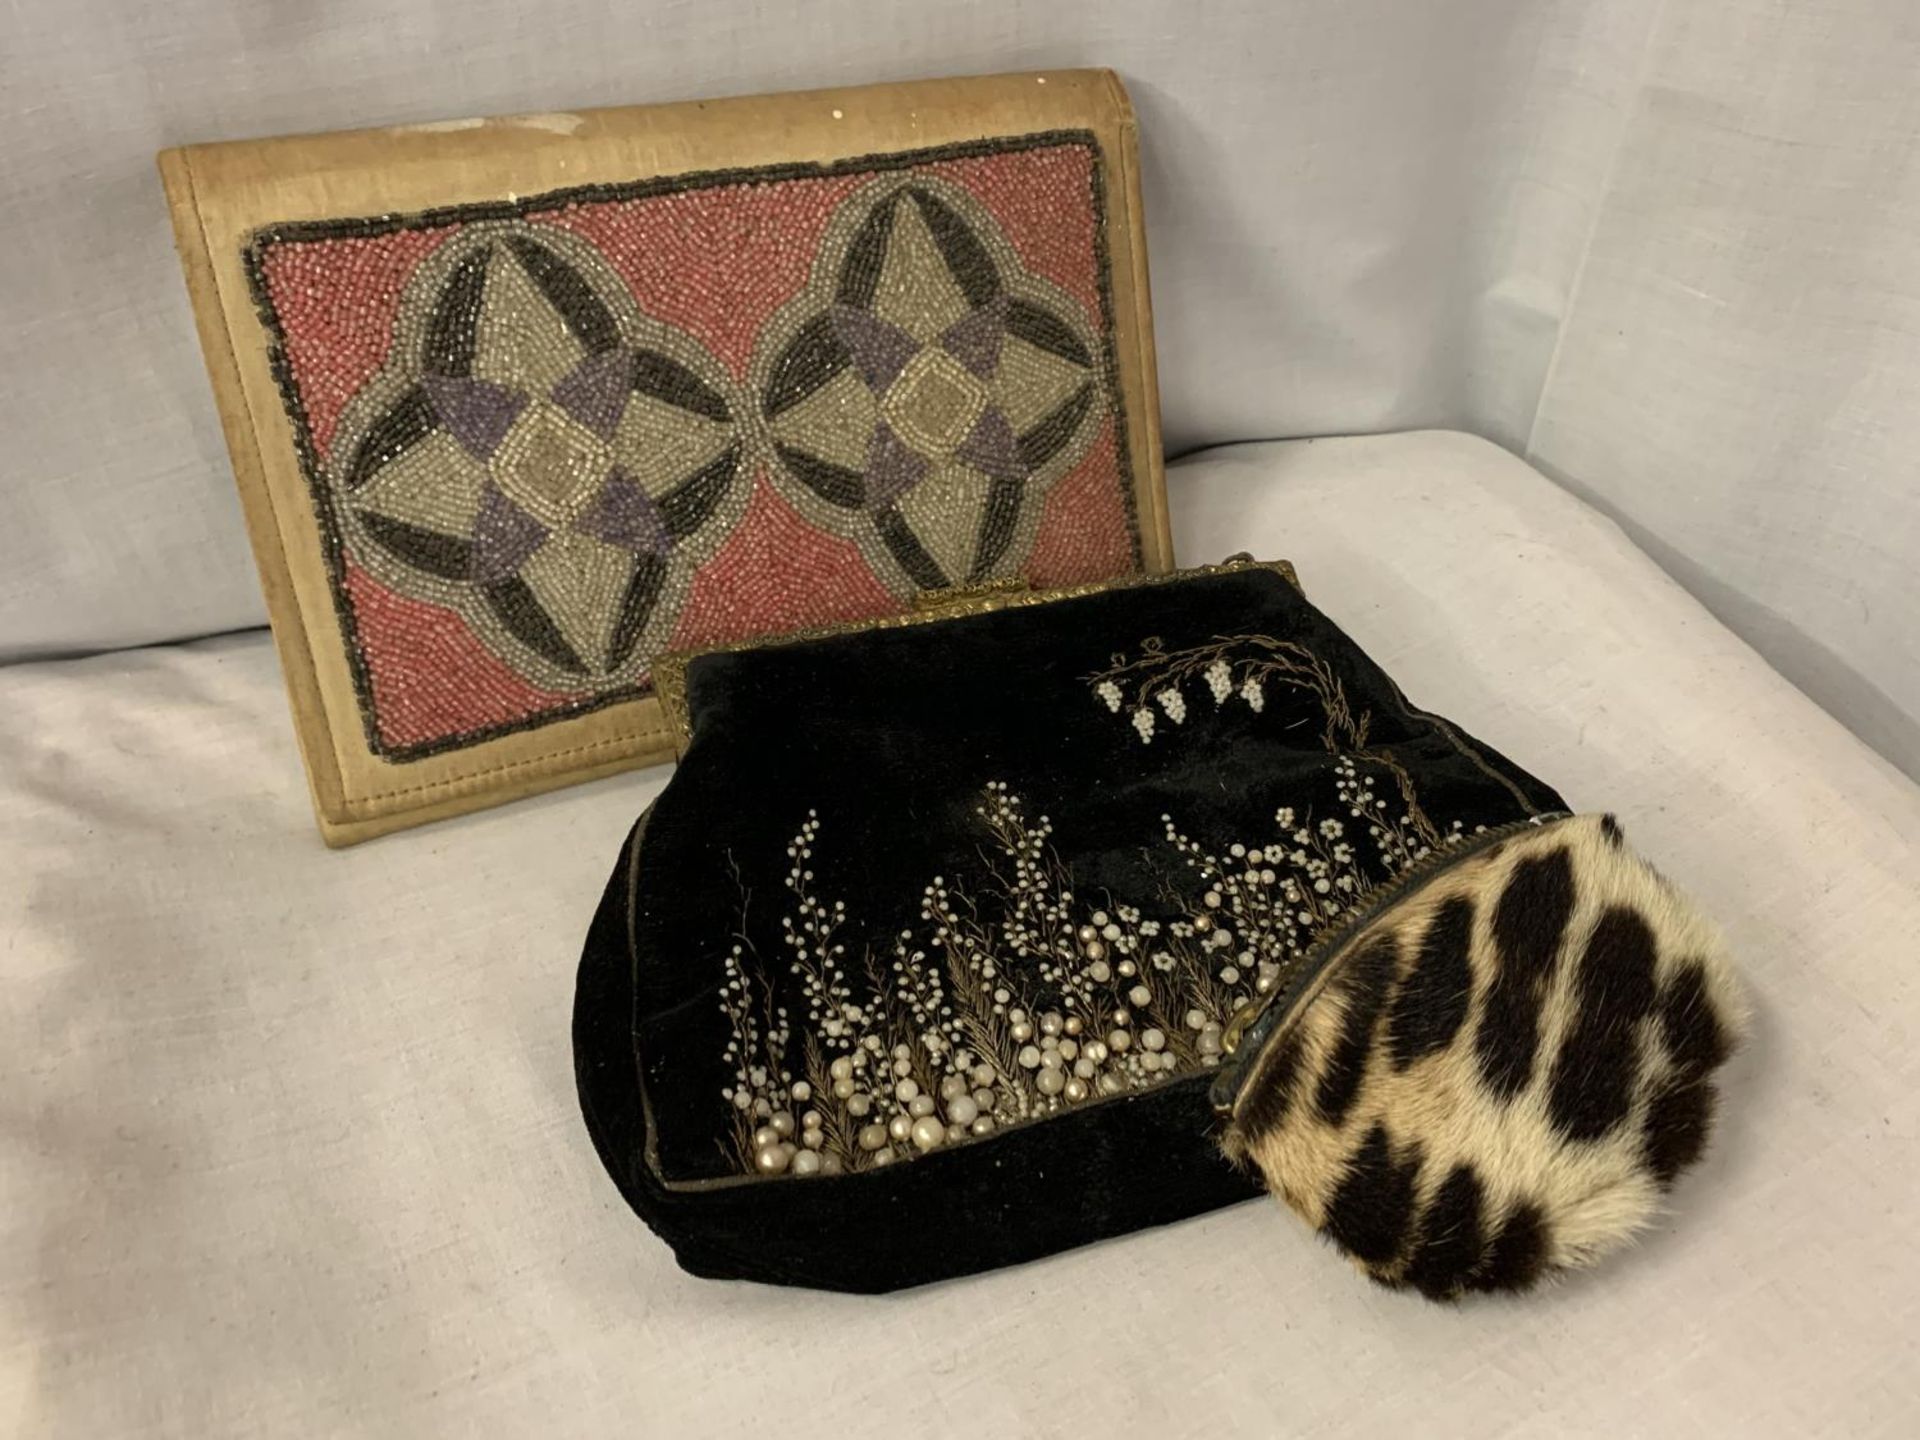 TWO BEADED CLUTCH BAGS AND A SMALL FUR COIN PURSE